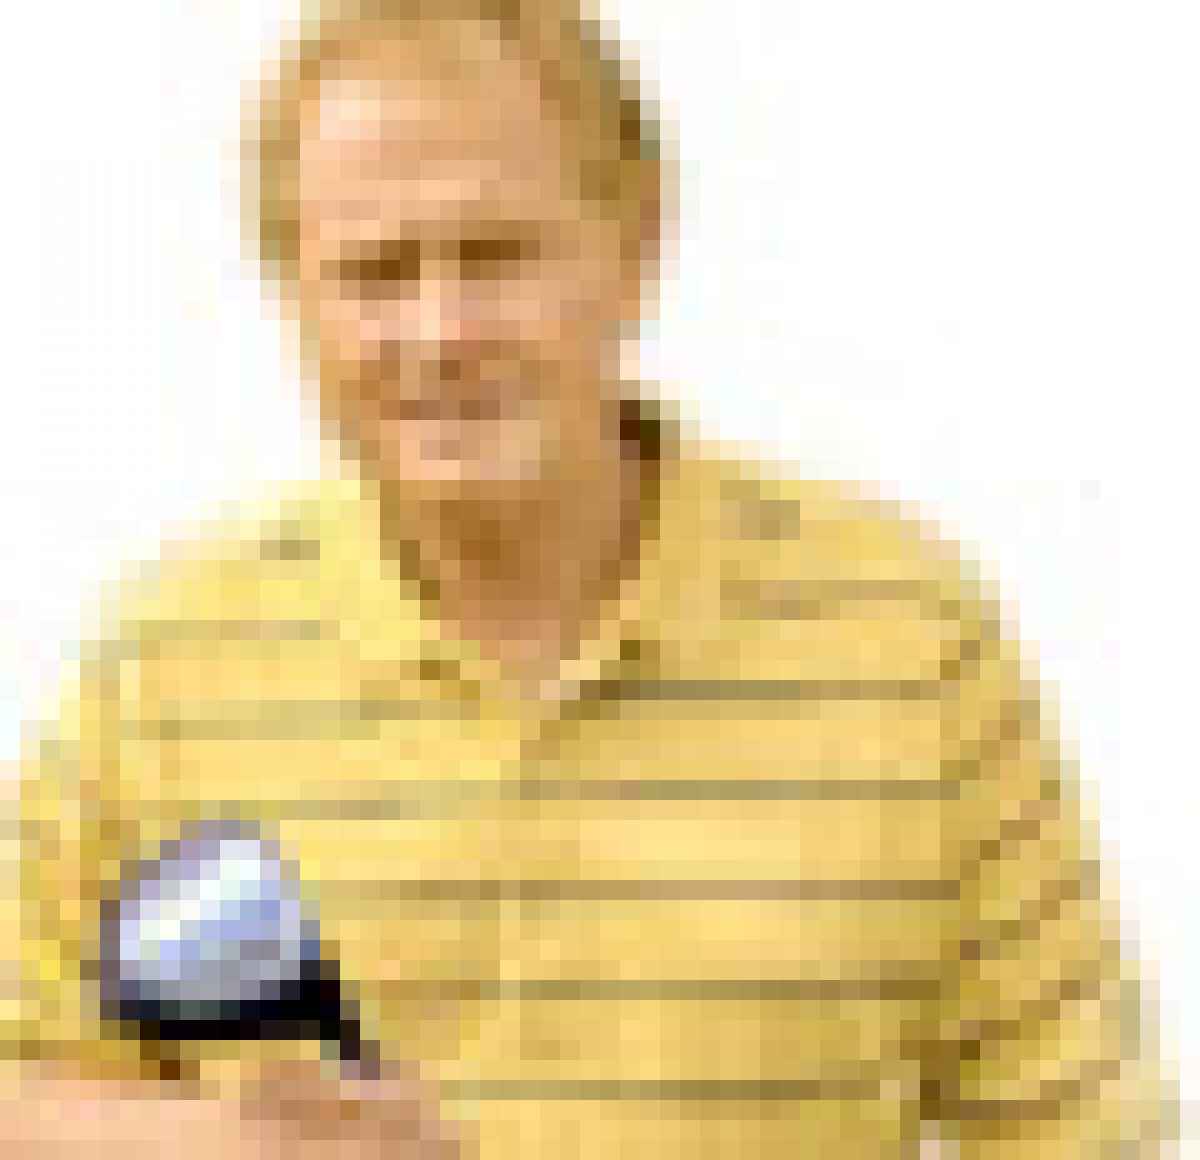 Nicklaus 'ring' of confidence